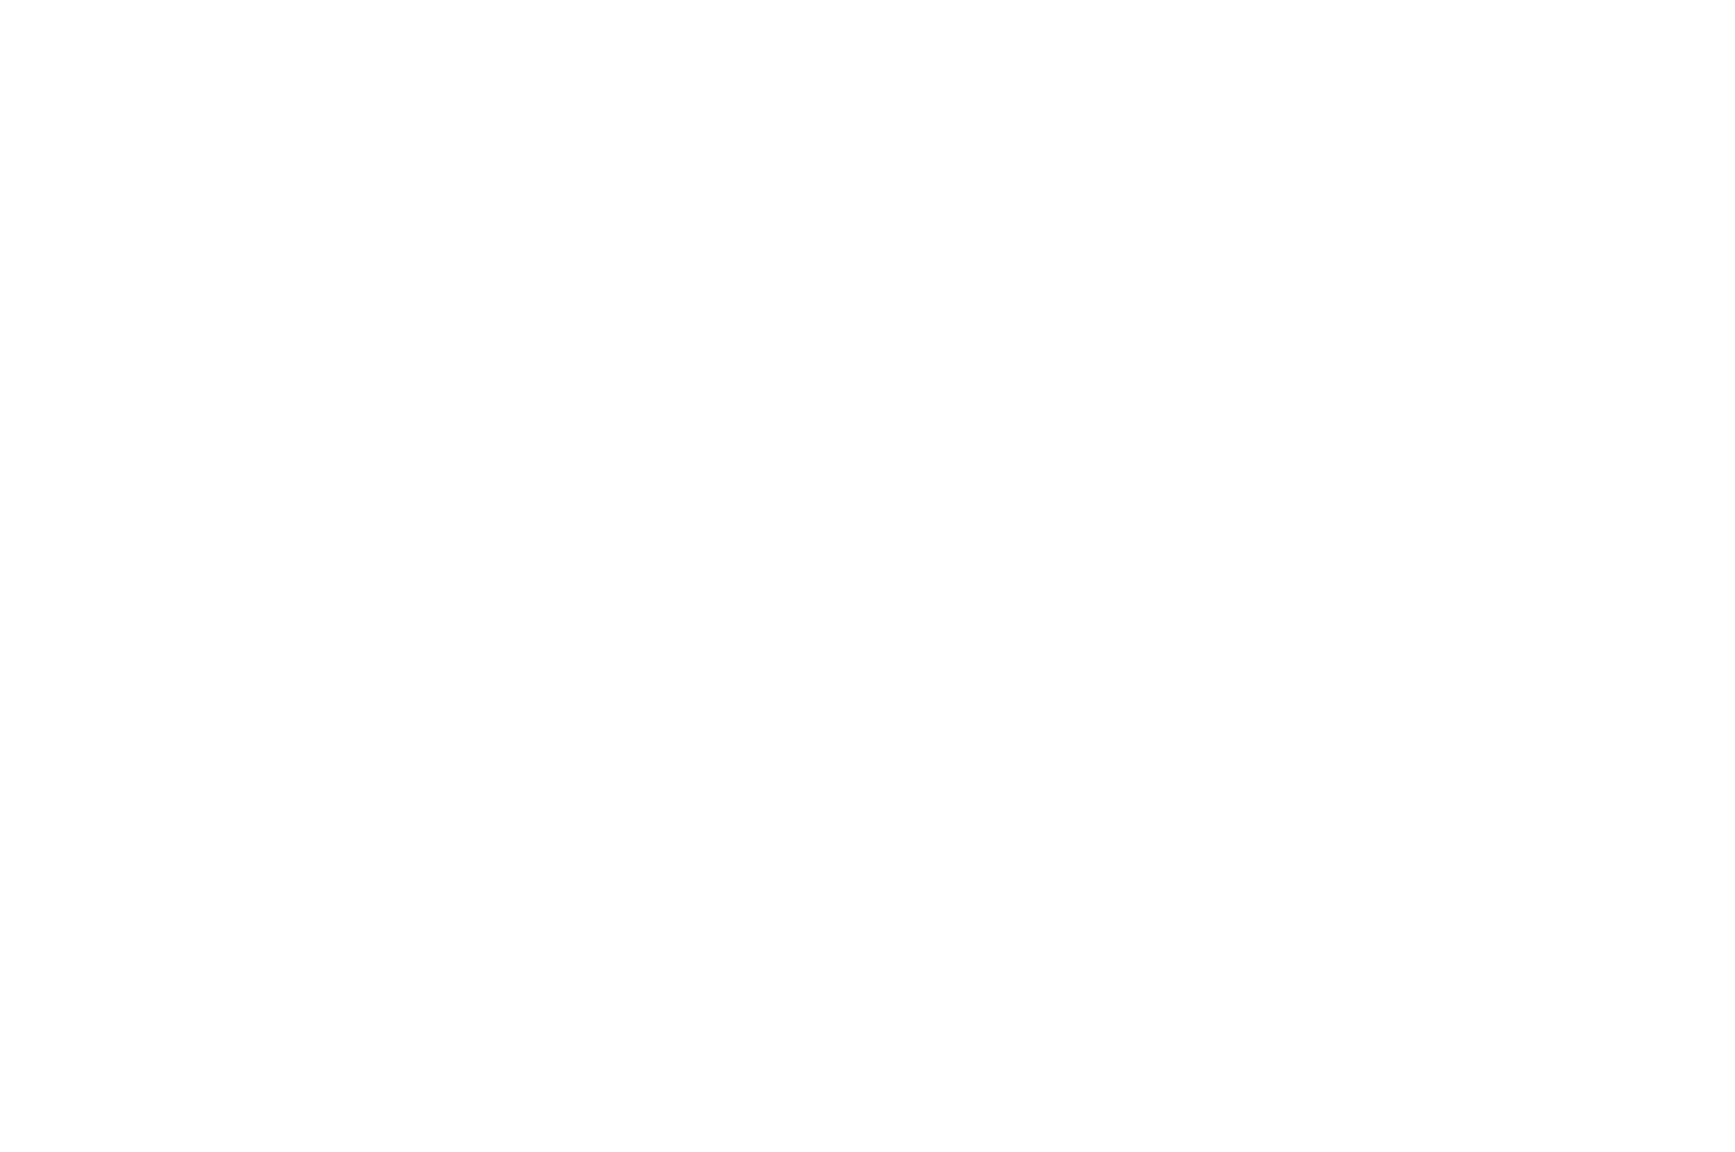 One Step OFFICIAL SELECTION A Royal Chance Film Festival 2024 white